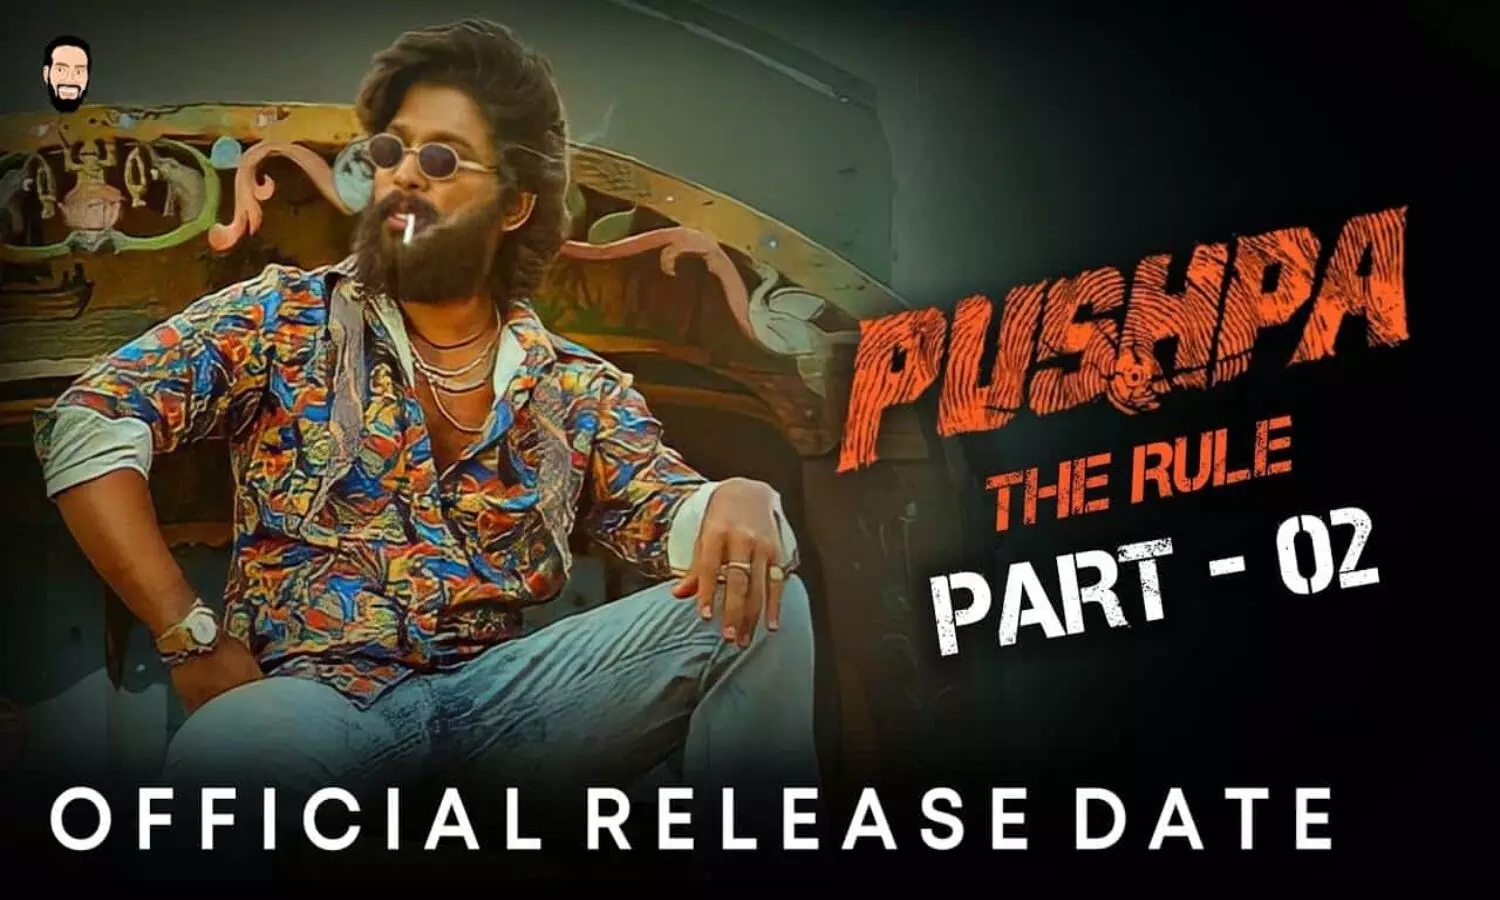 Pushpa the Rule Part 2